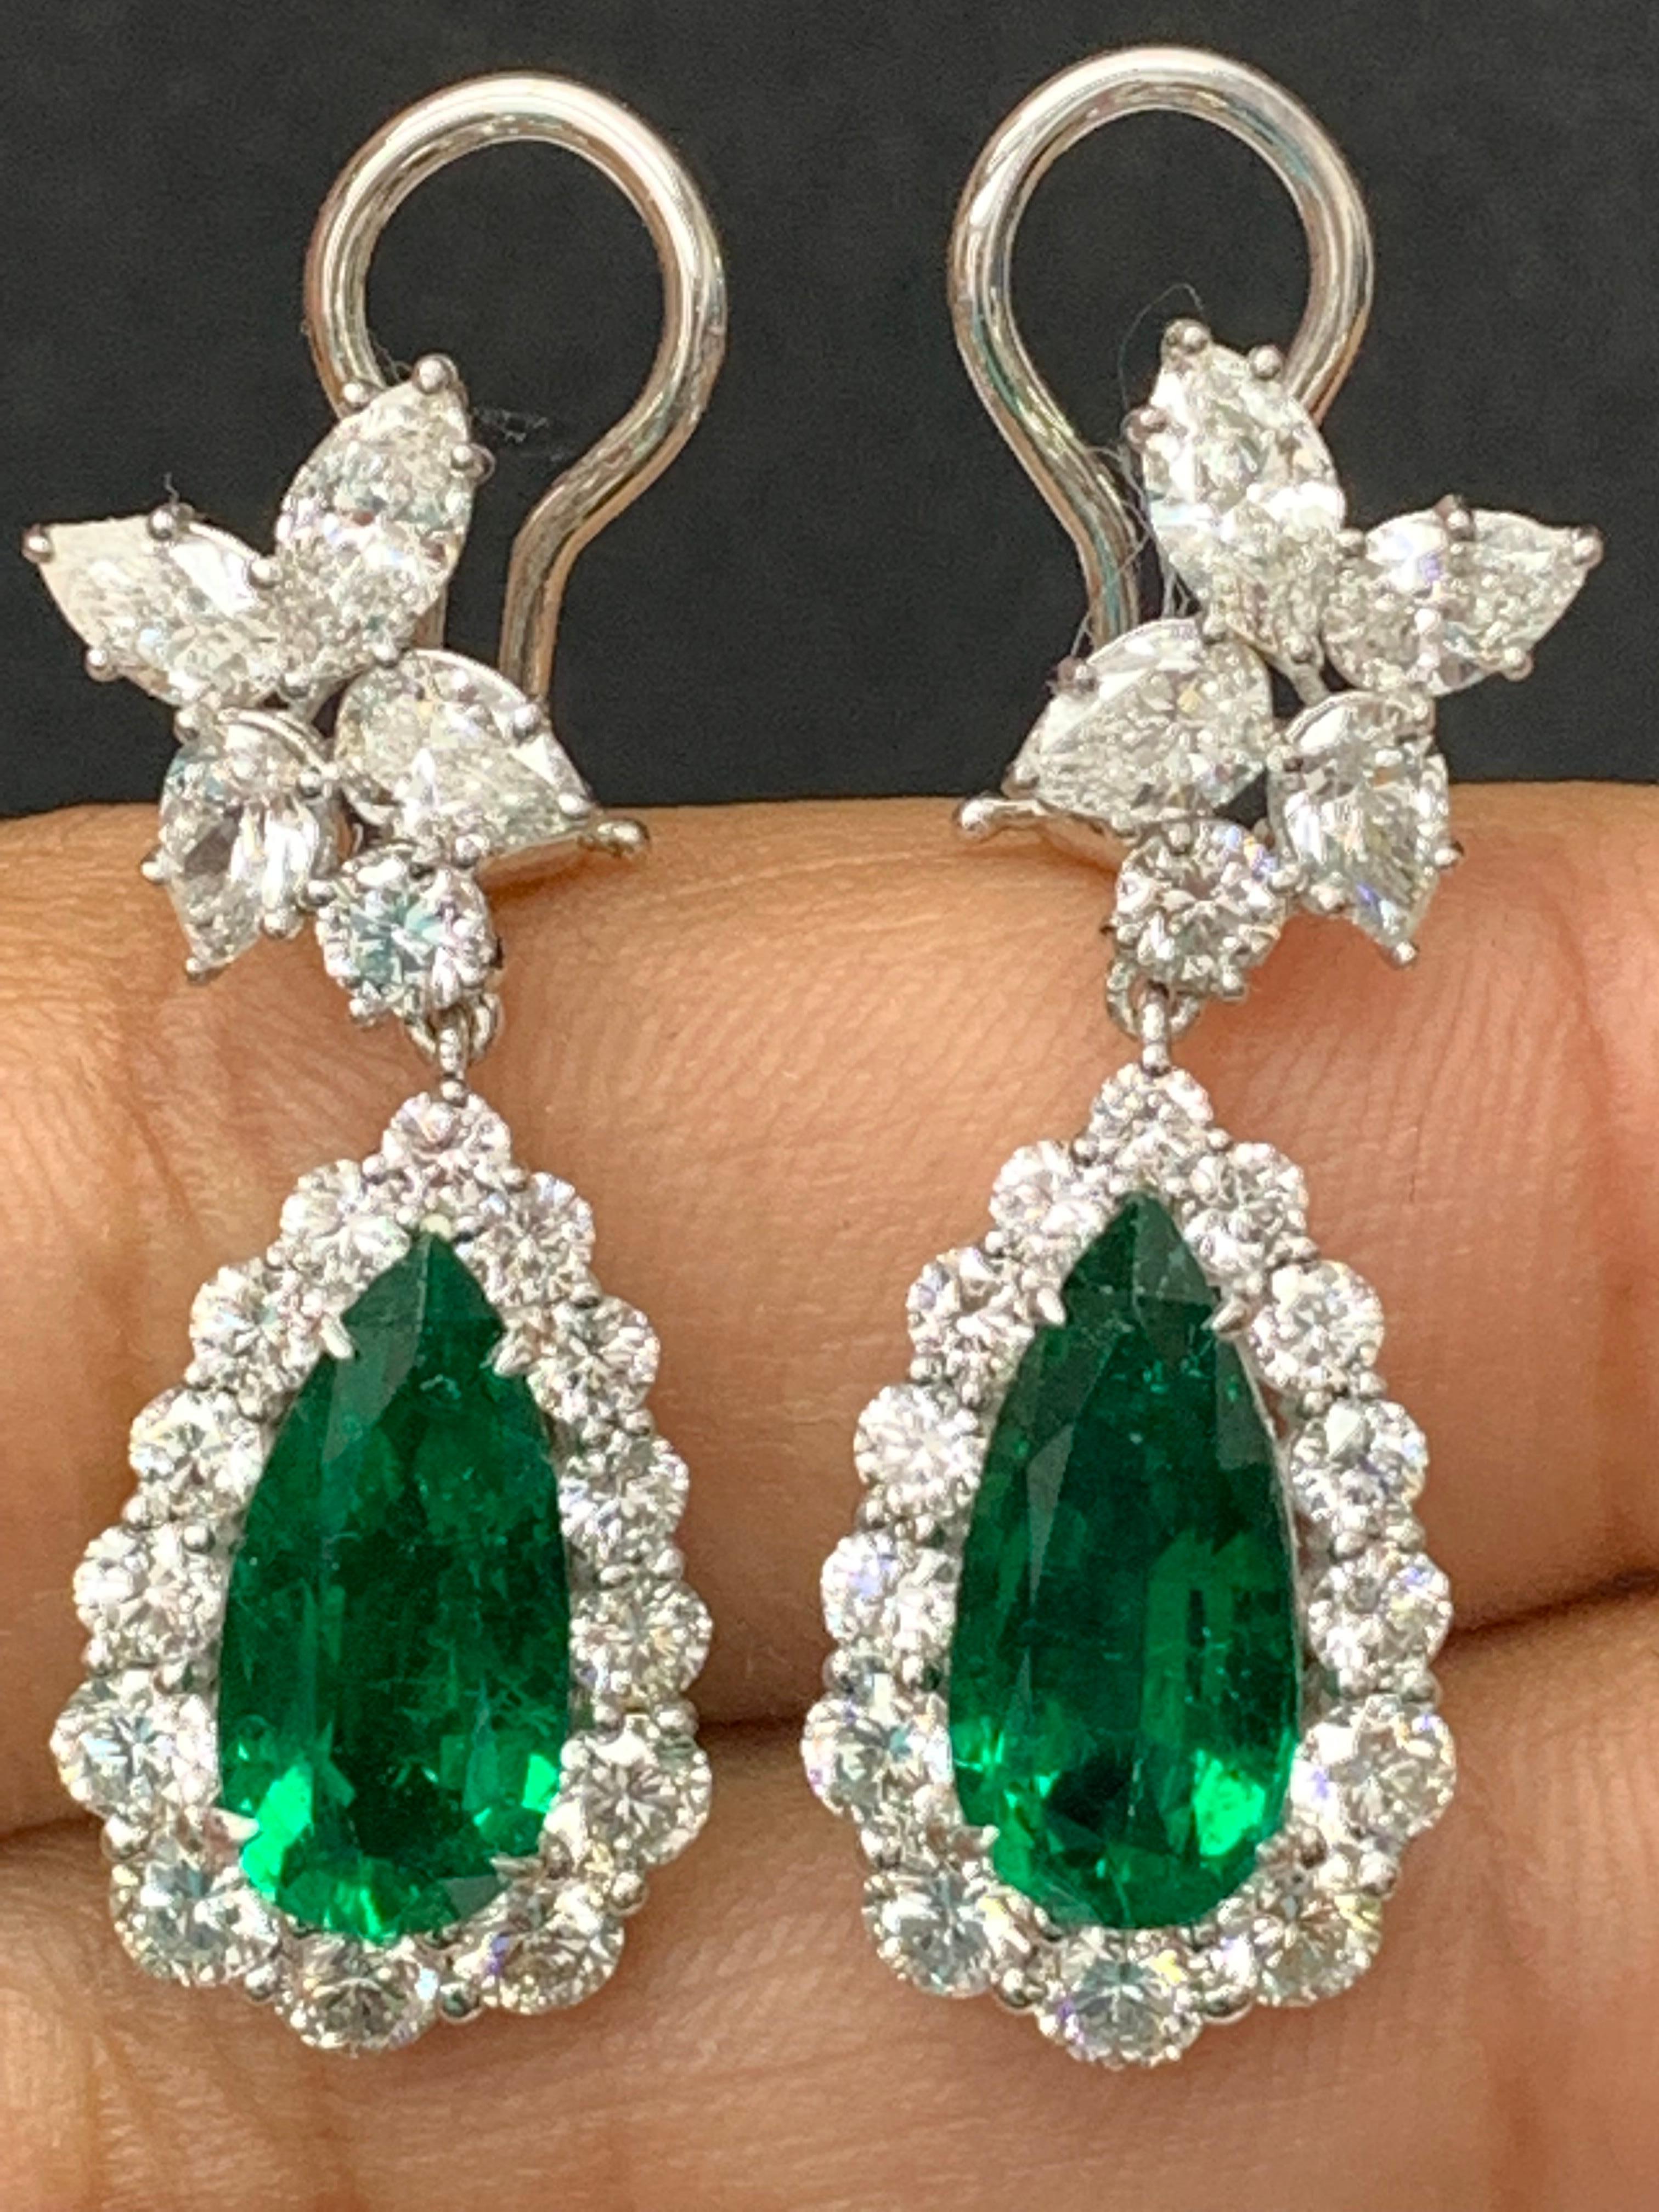 4.80 Carat Pear Shape Emerald and Diamond Drop Earrings in 18K White Gold For Sale 6